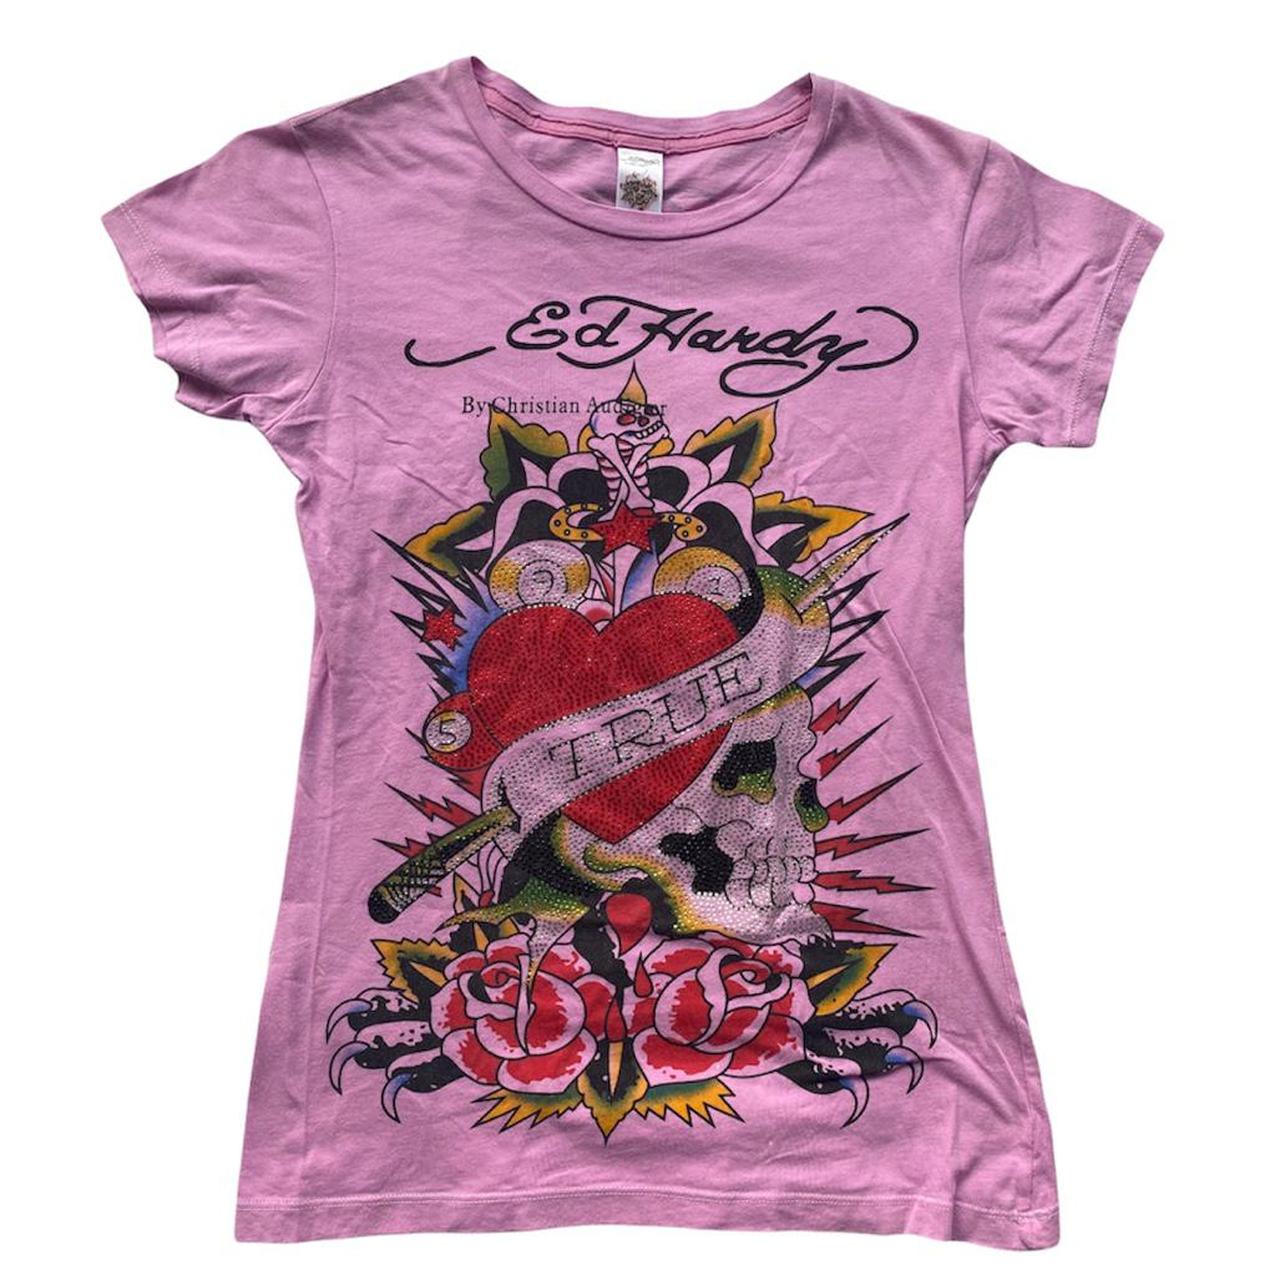 PINK ED HARDY GRAPHIC TATTOO PRINT T-SHIRT WITH... - Depop